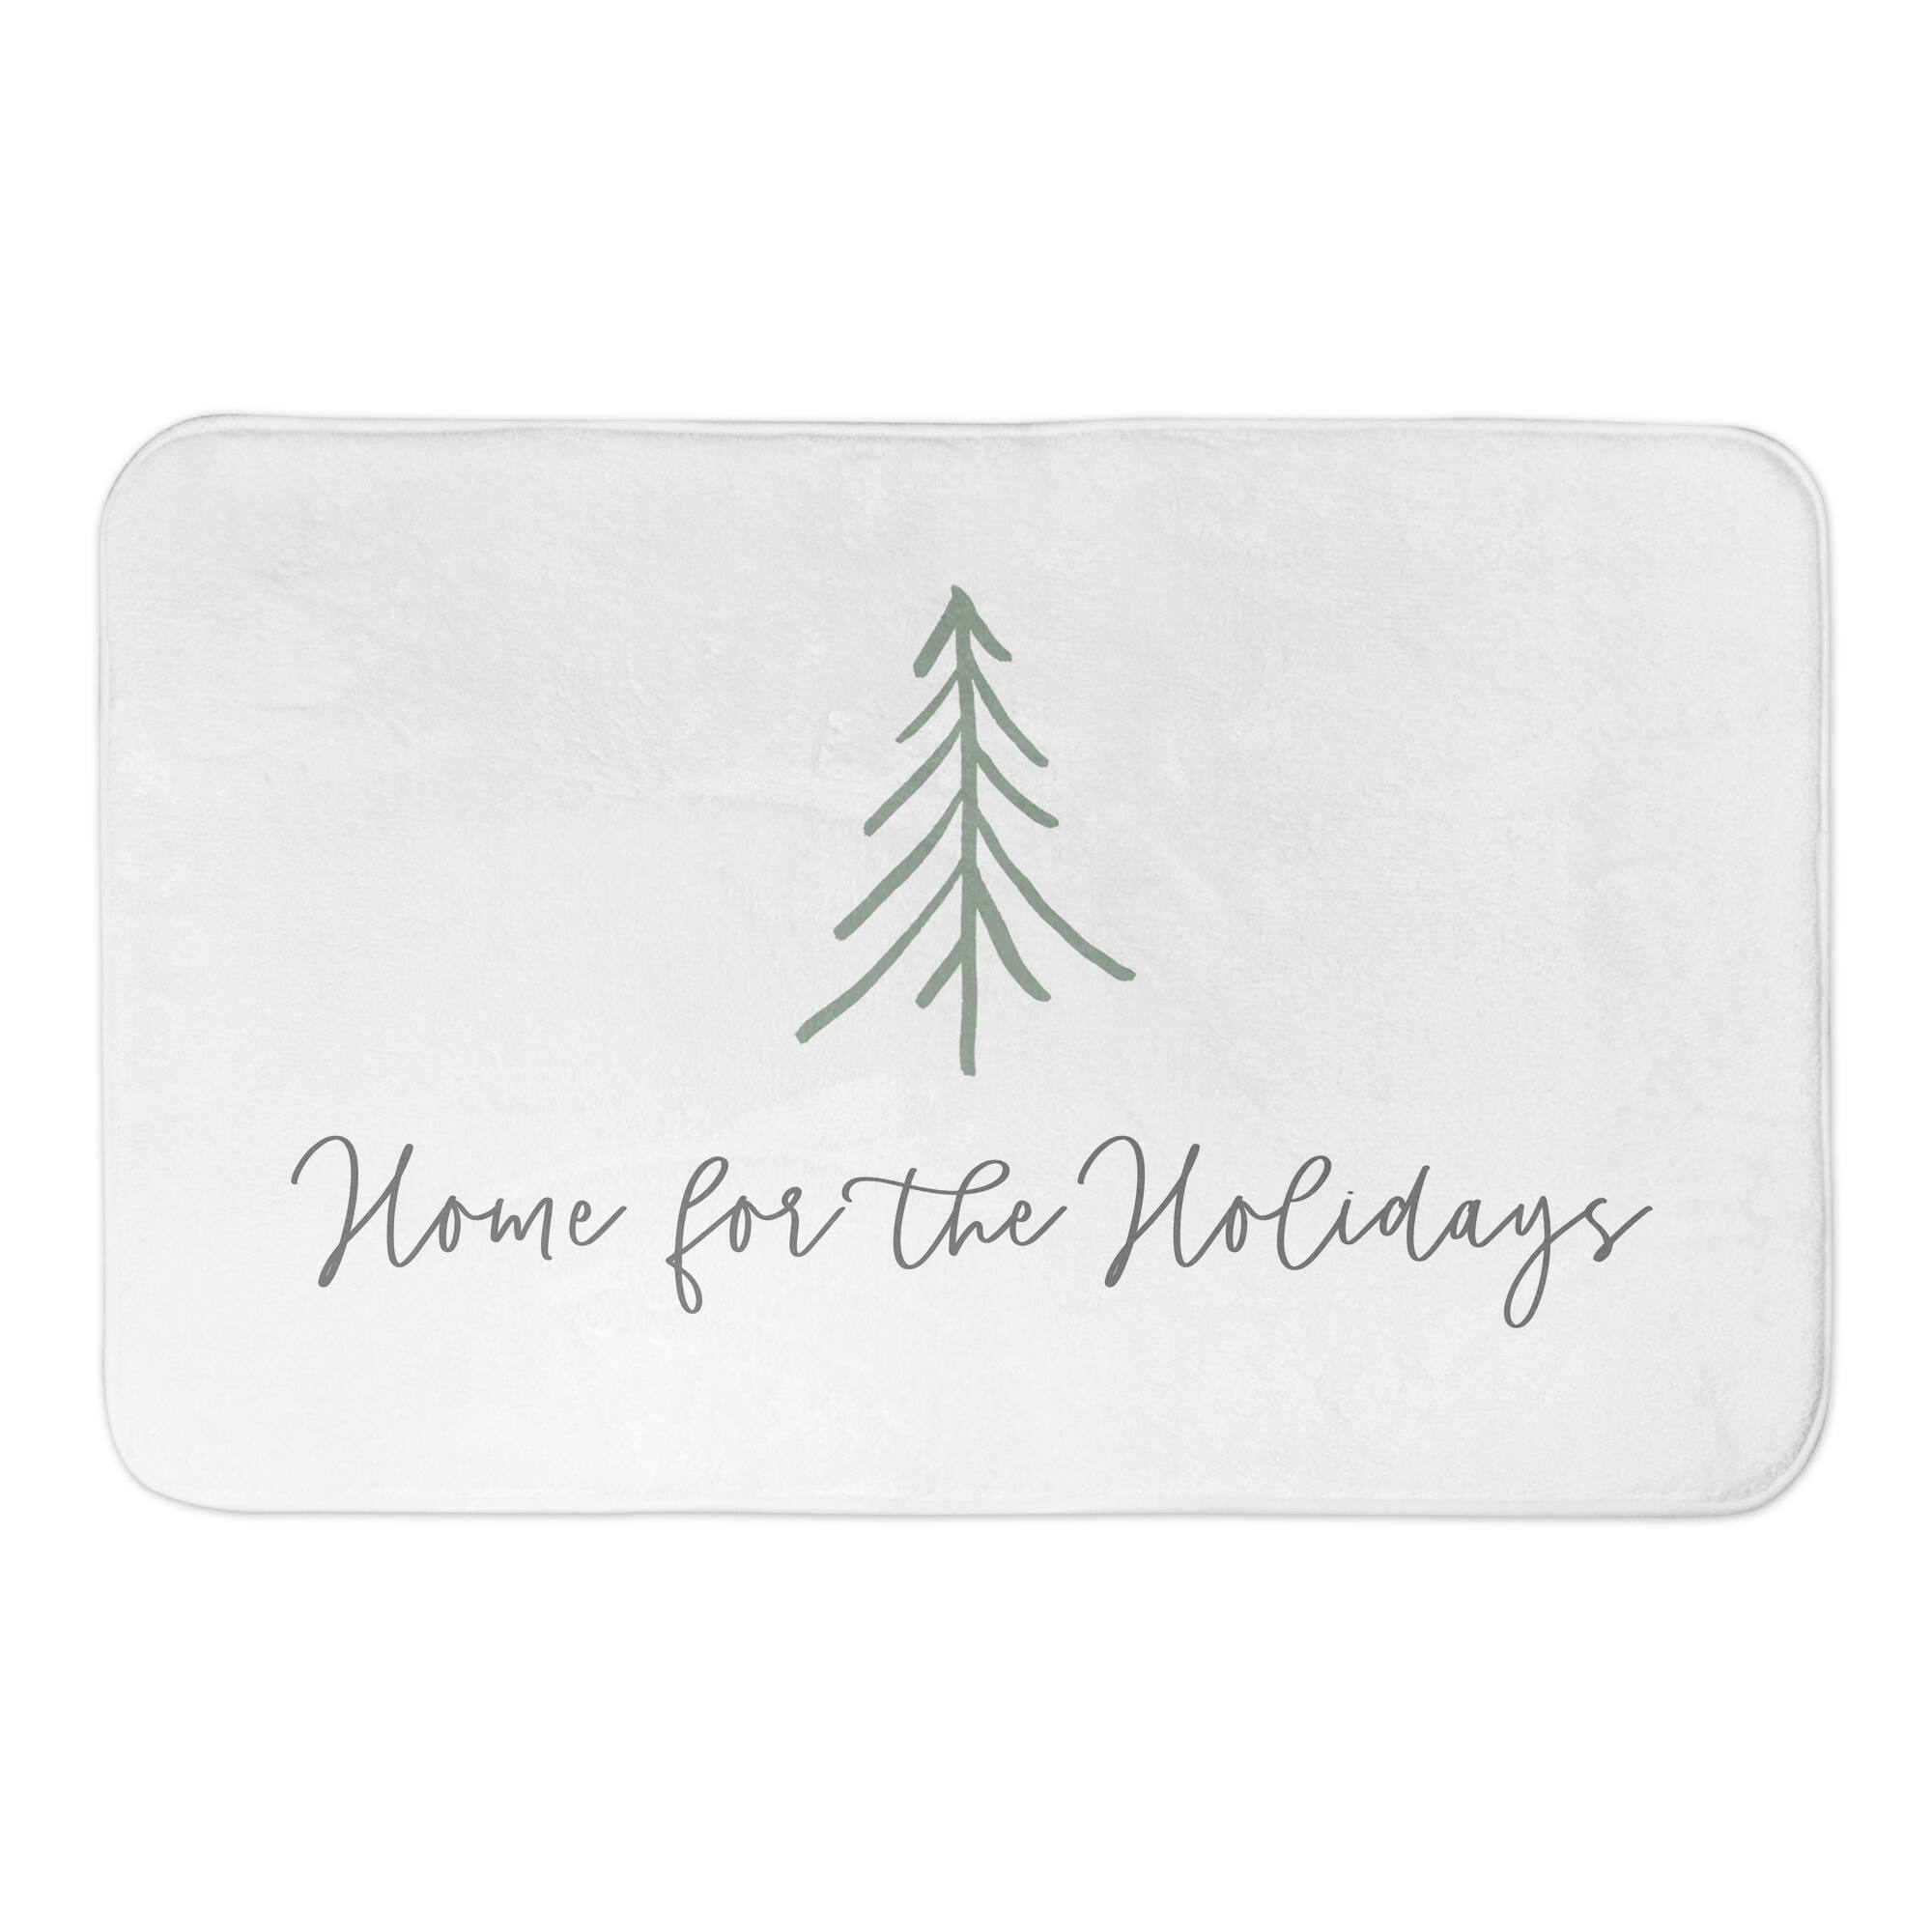 Home for the Holidays Bath Mat